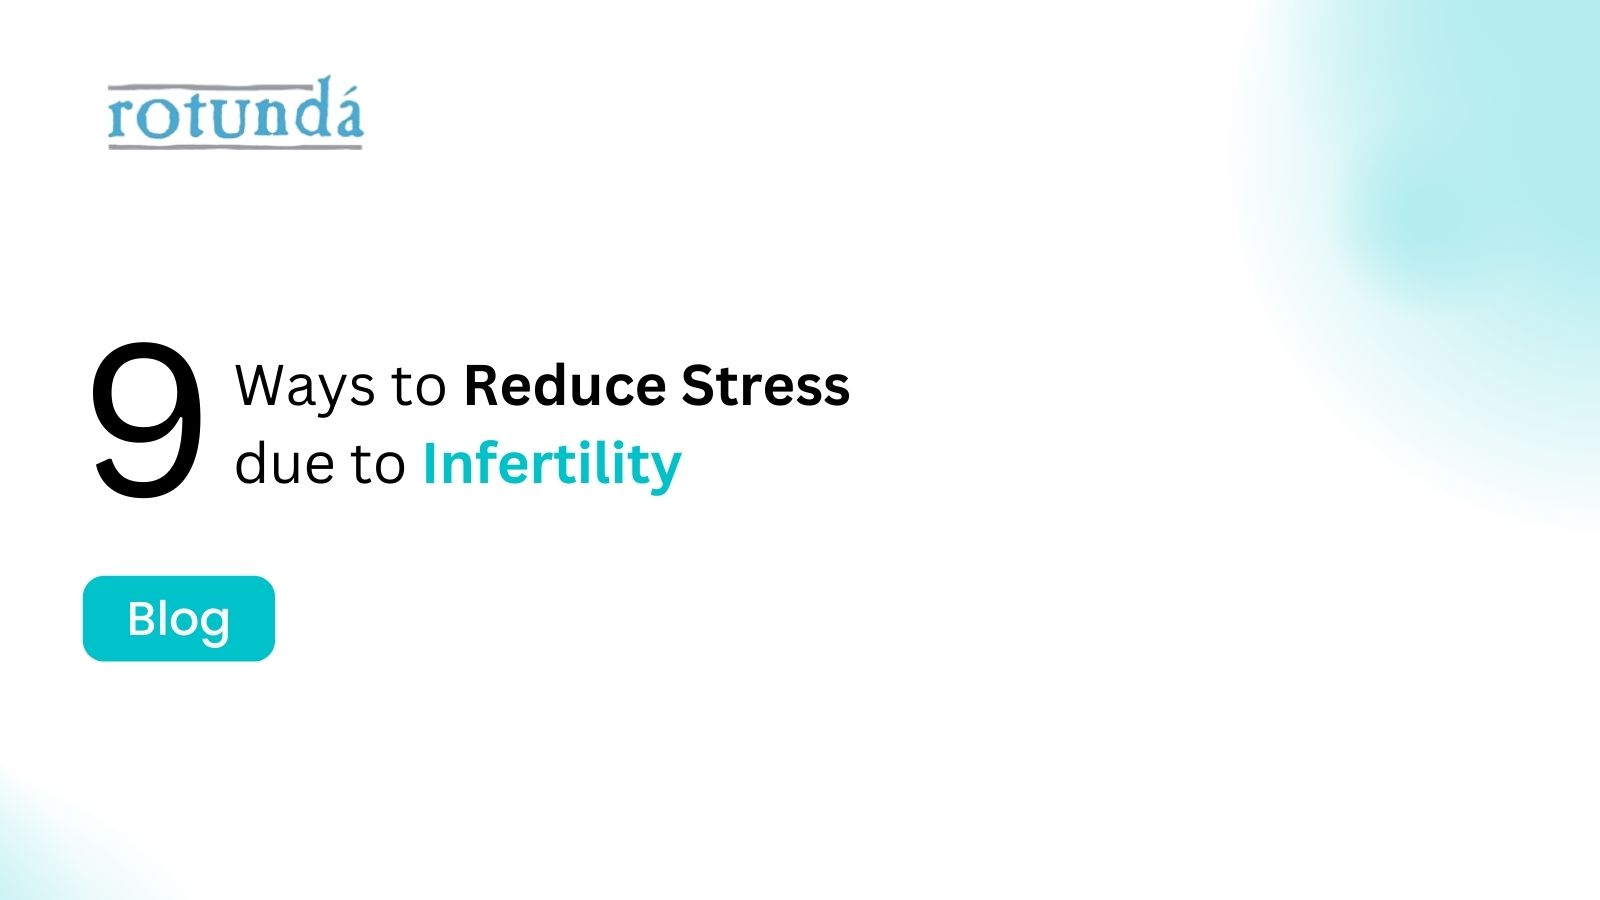 Ways to Reduce Stress due to infertility